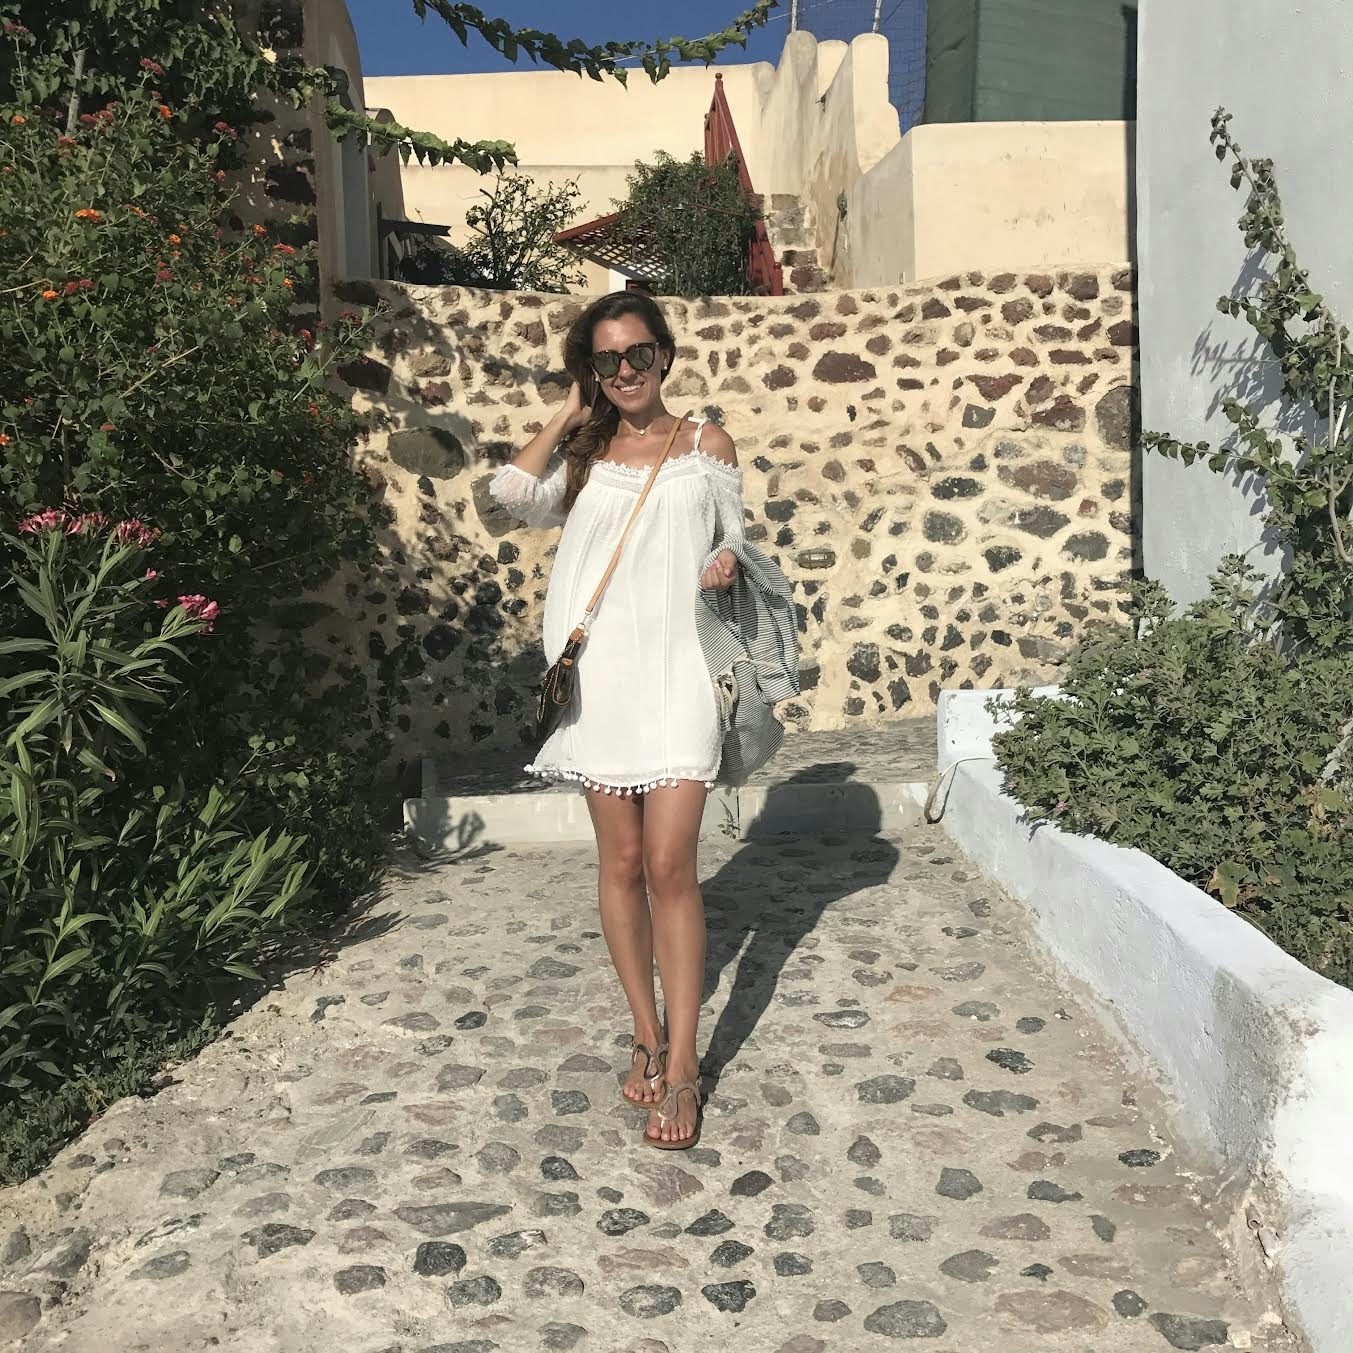 Travel advisor Megan in white dress standing on a cobbled walkway with white wall and buildings in view